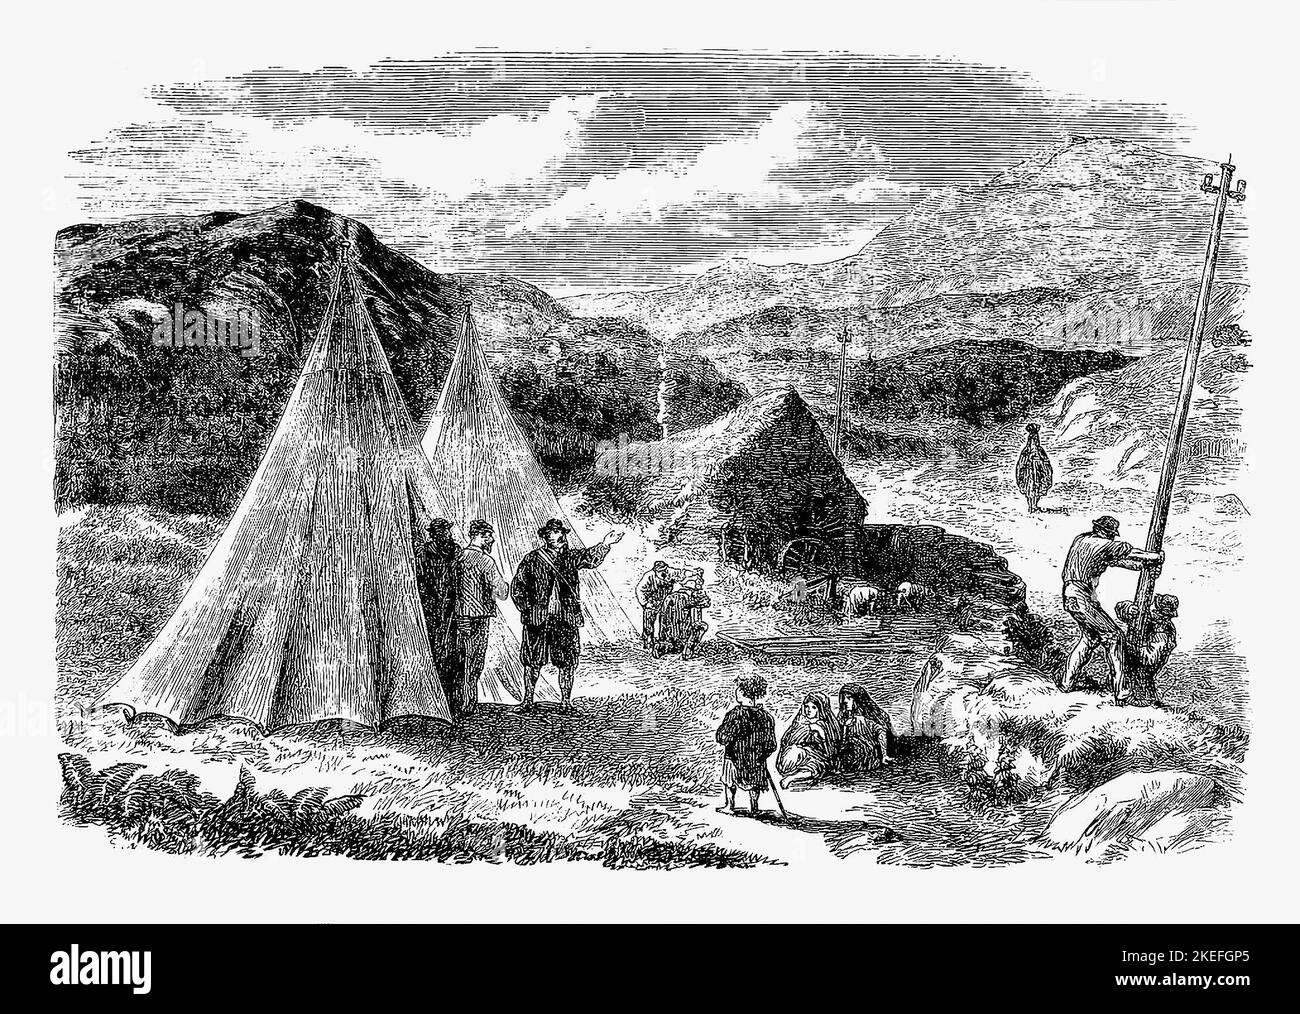 The camp of workers in the 19th century erecting poles for the Telegraph Company on the road between Killarney and Valencia, County Kerry, Ireland. Stock Photo